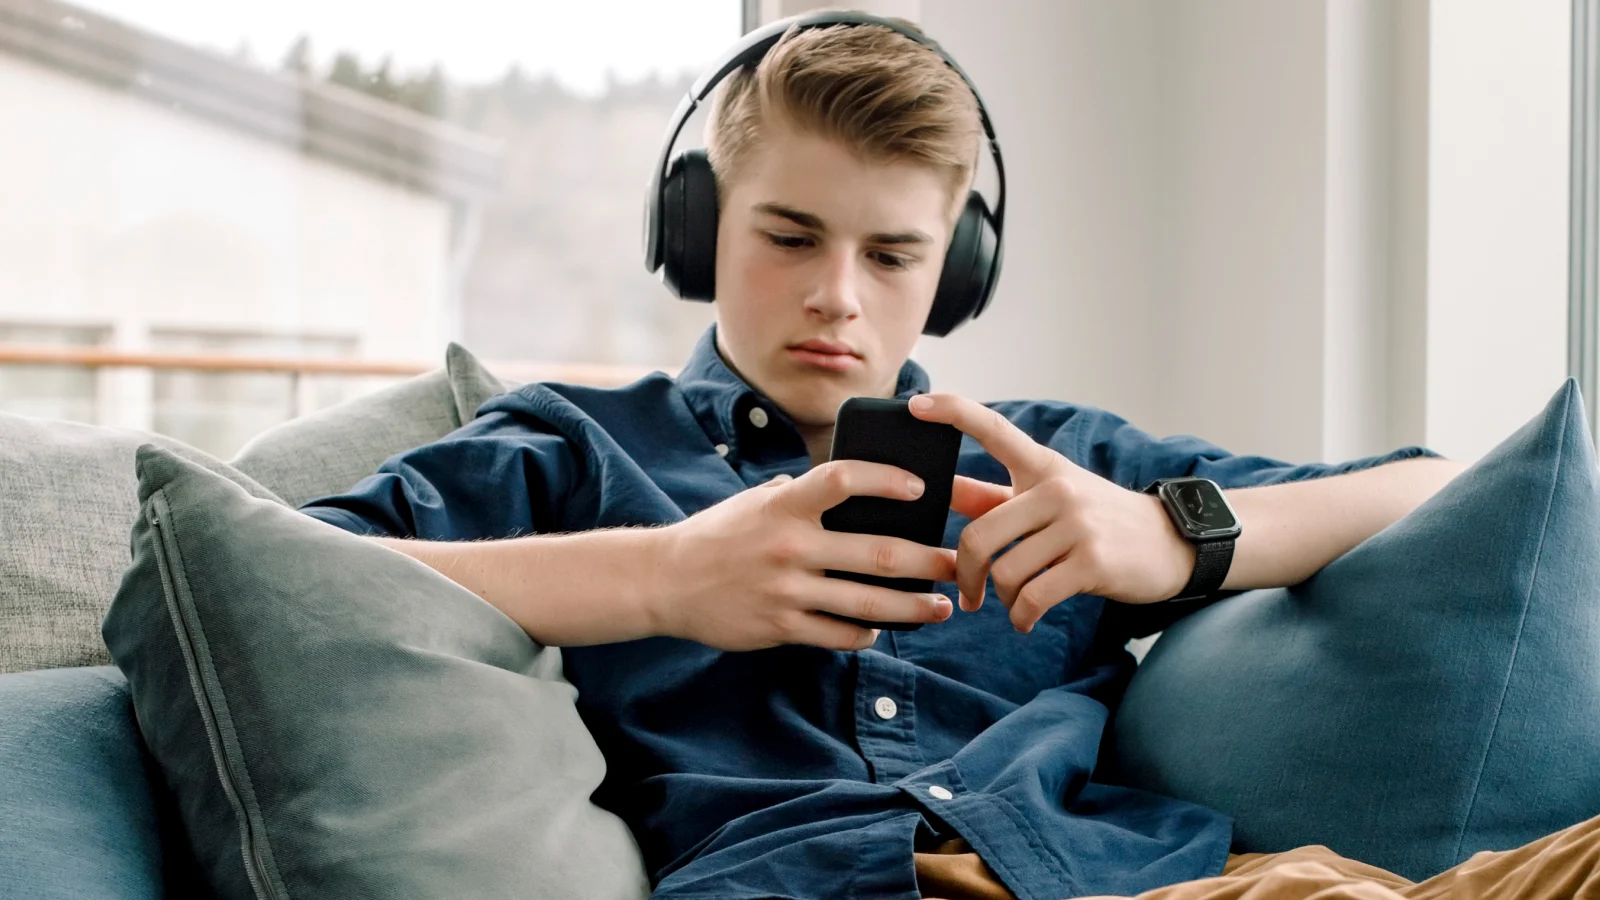 Focused on privacy - teen boy on couch with headphones on looking at phone